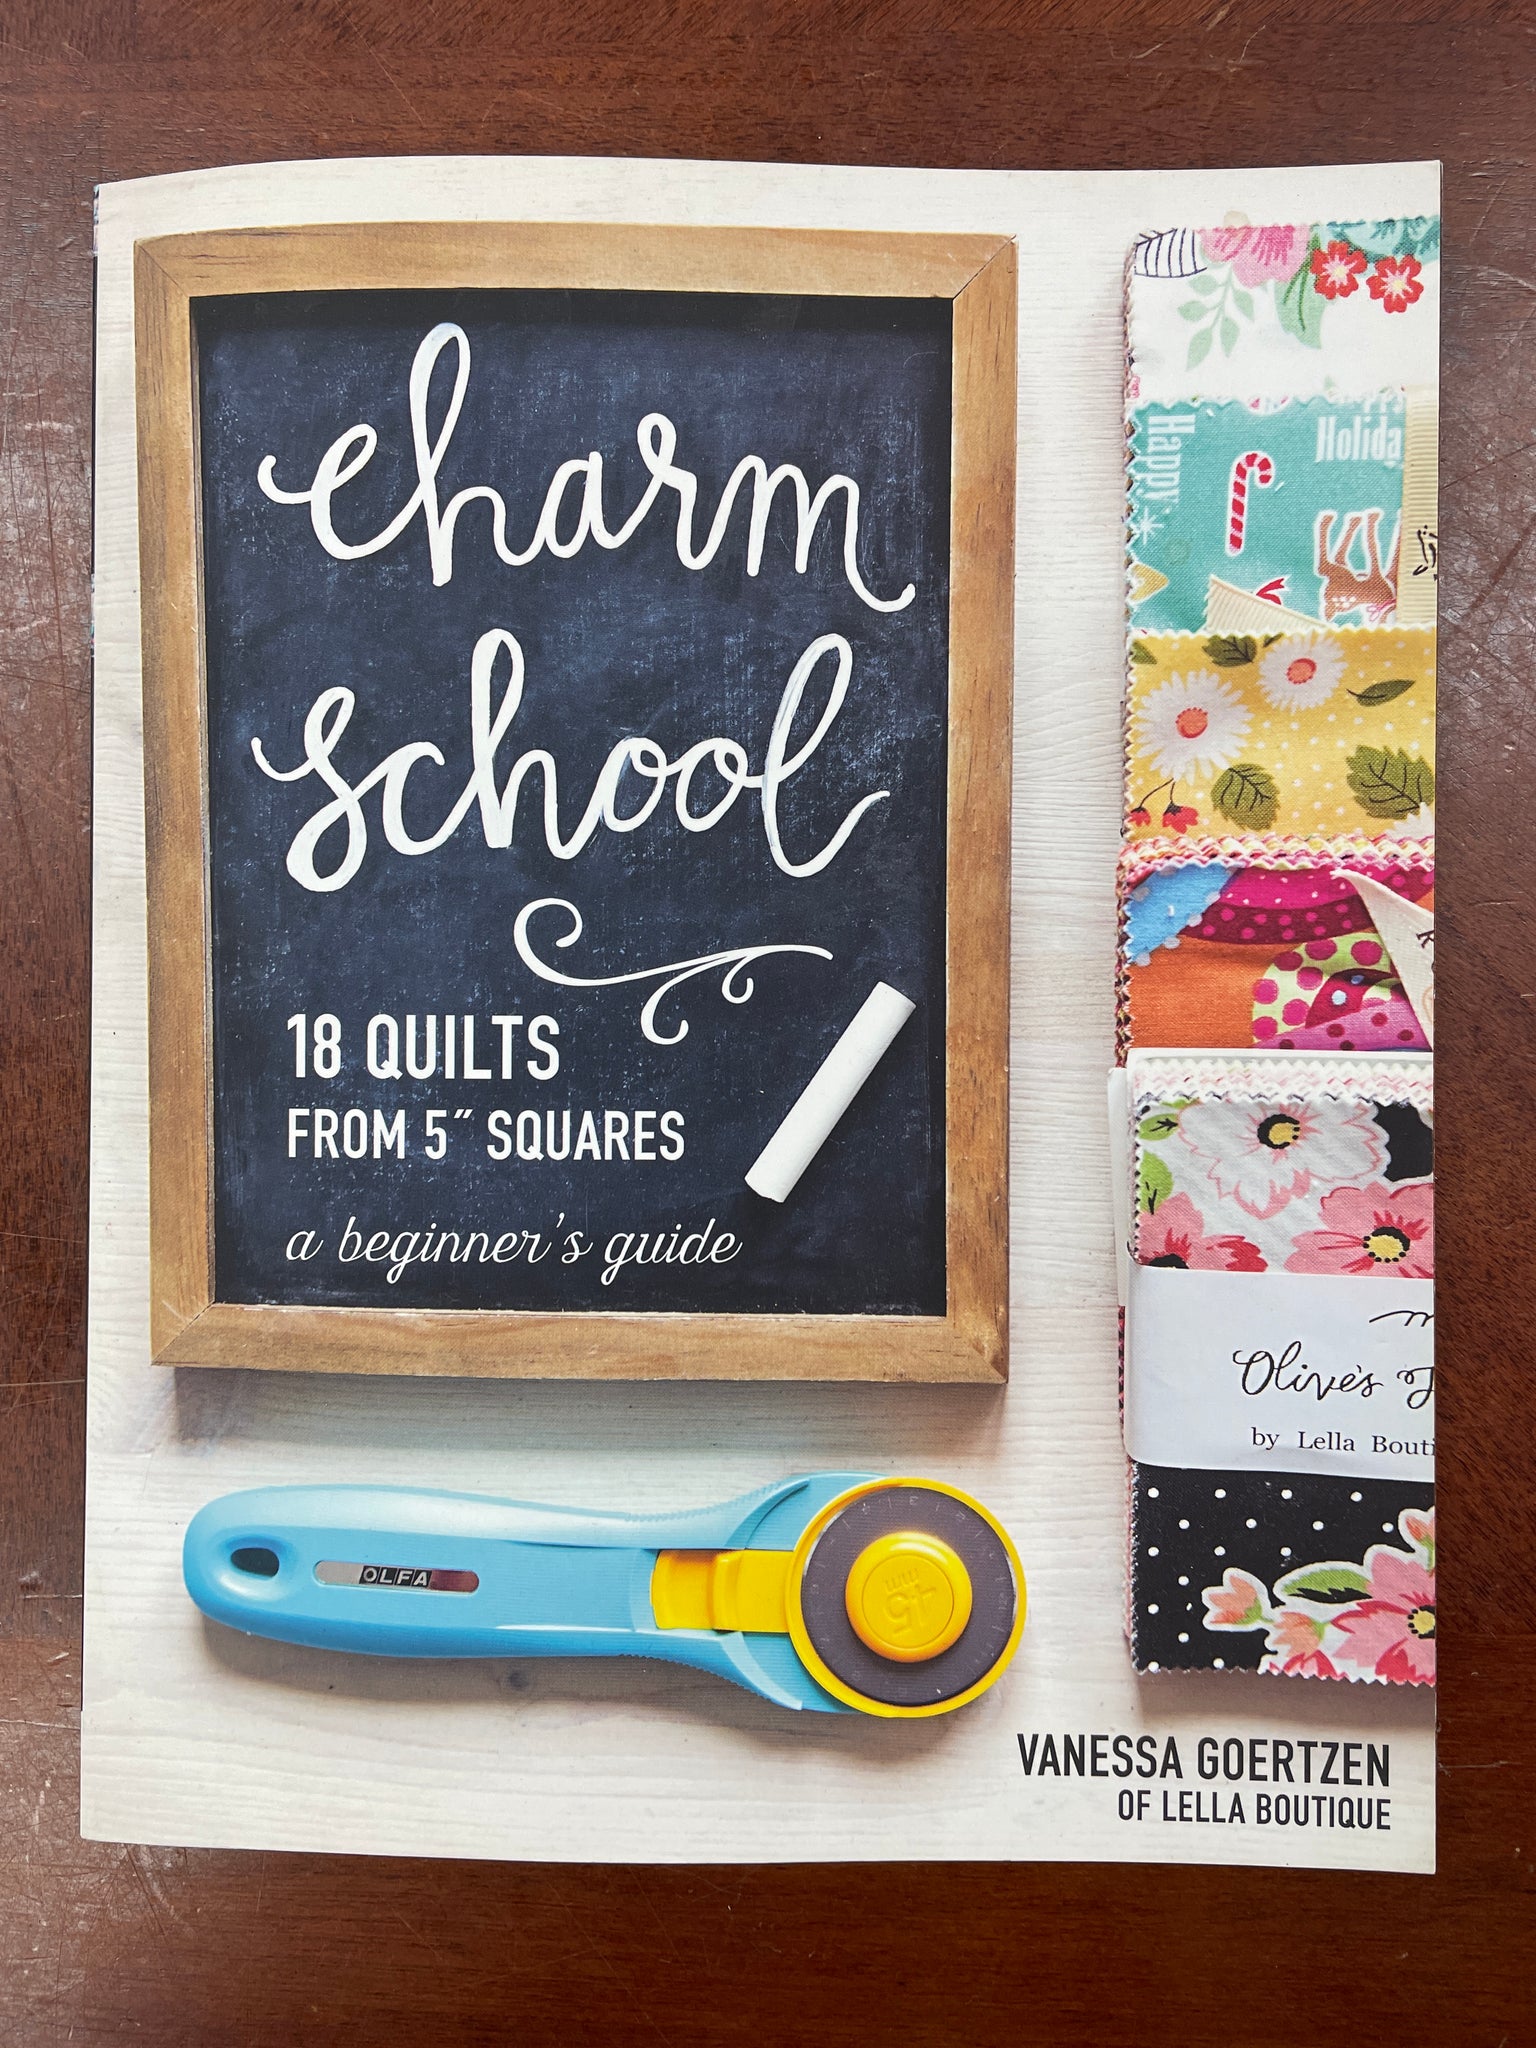 2017 Quilting Book - "Charm School"